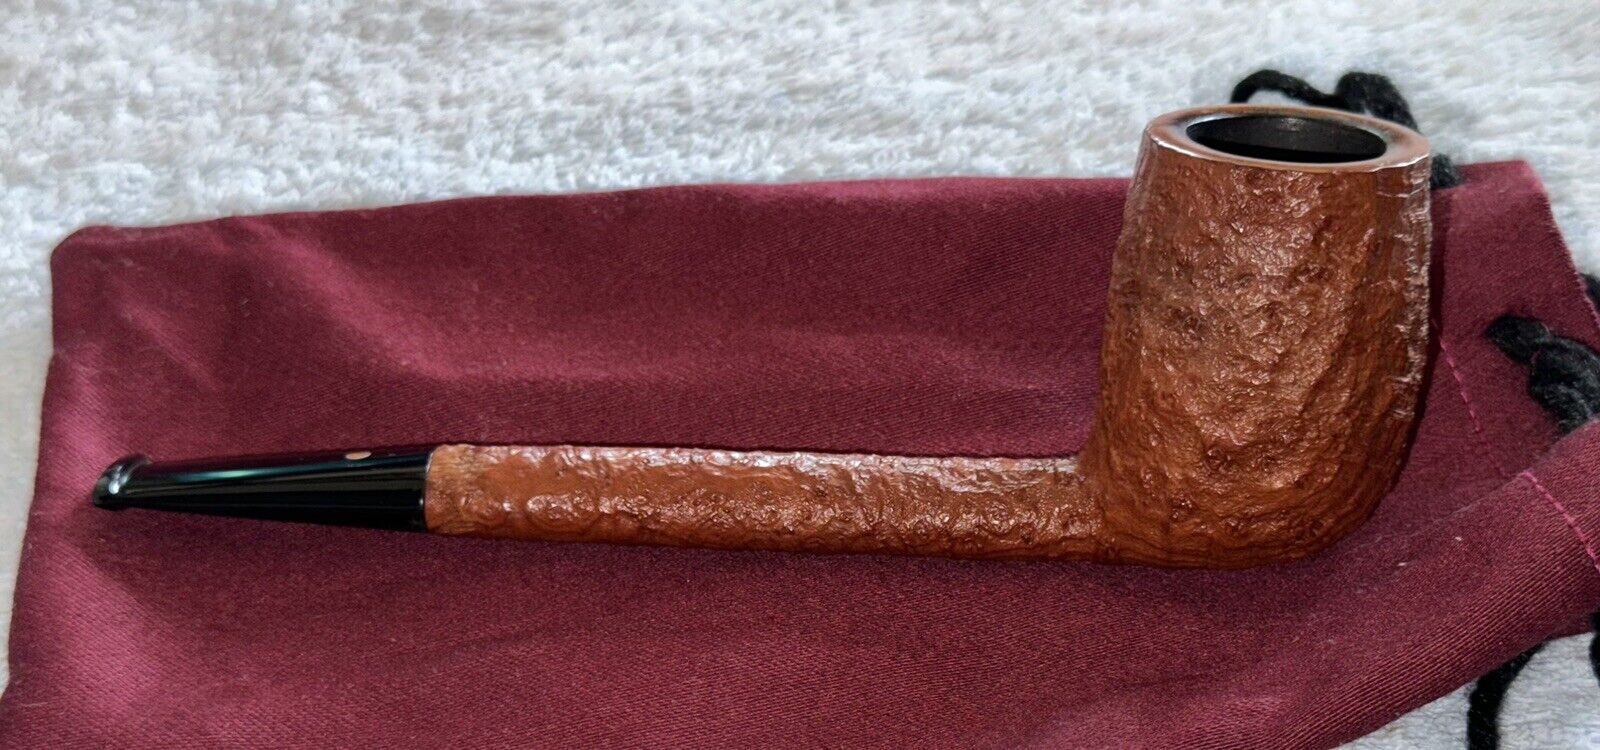 🇬🇧 ASHTON 1990 LX OLDCHURCH CANADIAN 360° Relief Grain BILL TAYLOR PIPE - MINT